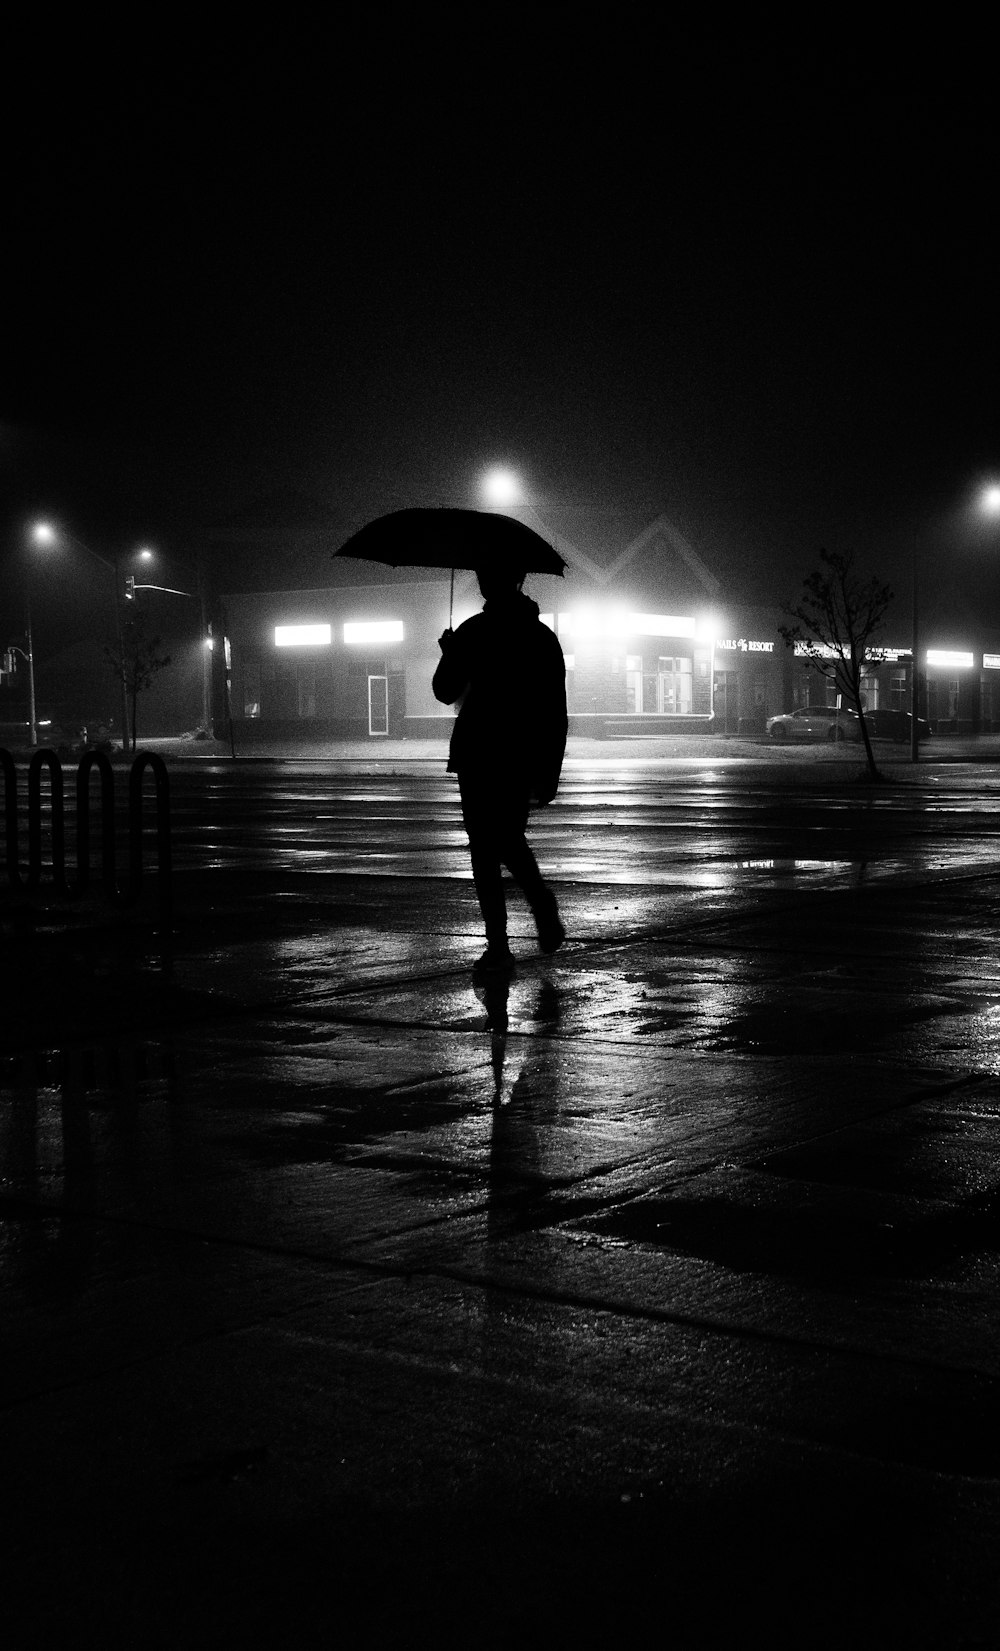 a person walking in the rain with an umbrella